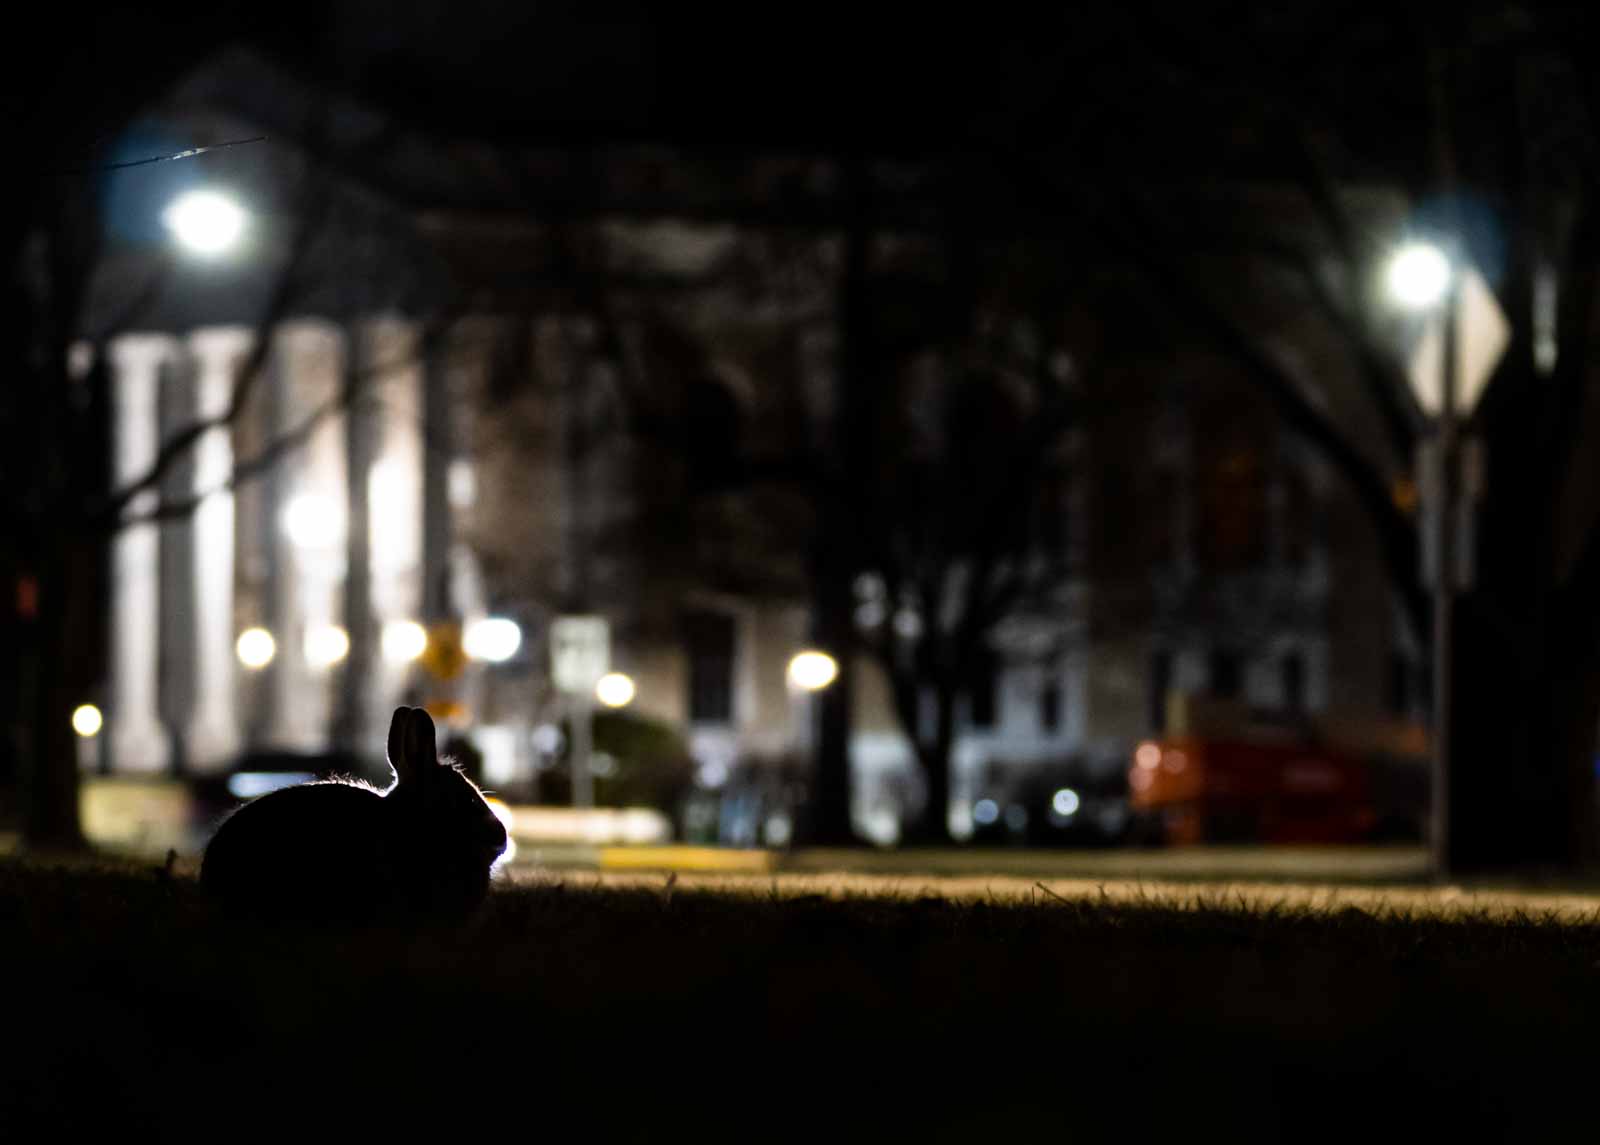 A rabbit is seen at night with Memorial Chapel in the background.